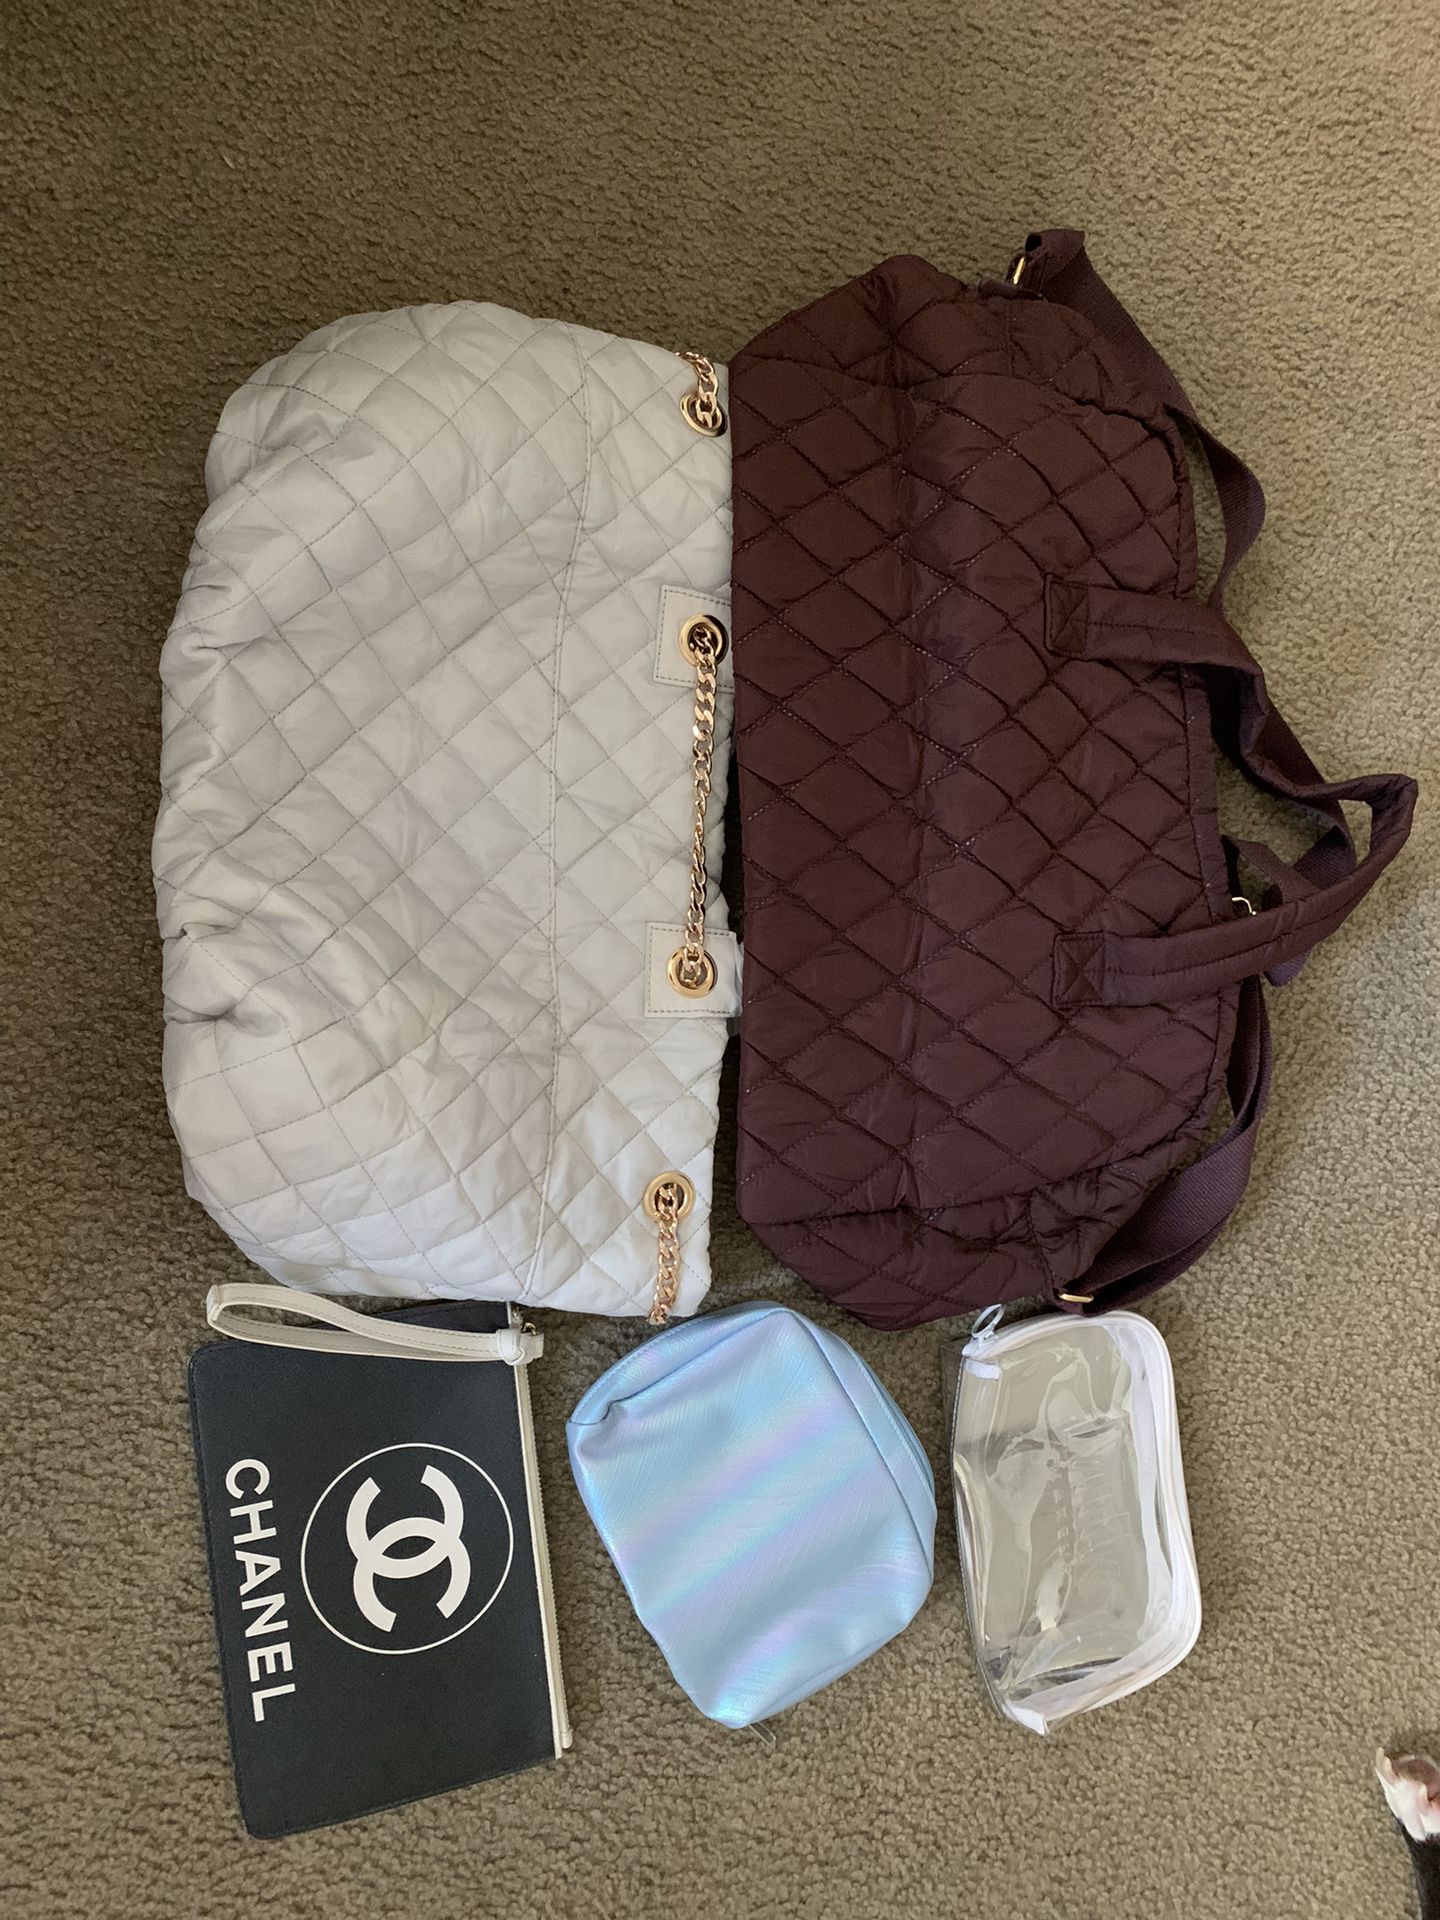 NWT Z Gallerie Coco Chanel Makeup/Toiletry Bag for Sale in Las Vegas, NV -  OfferUp